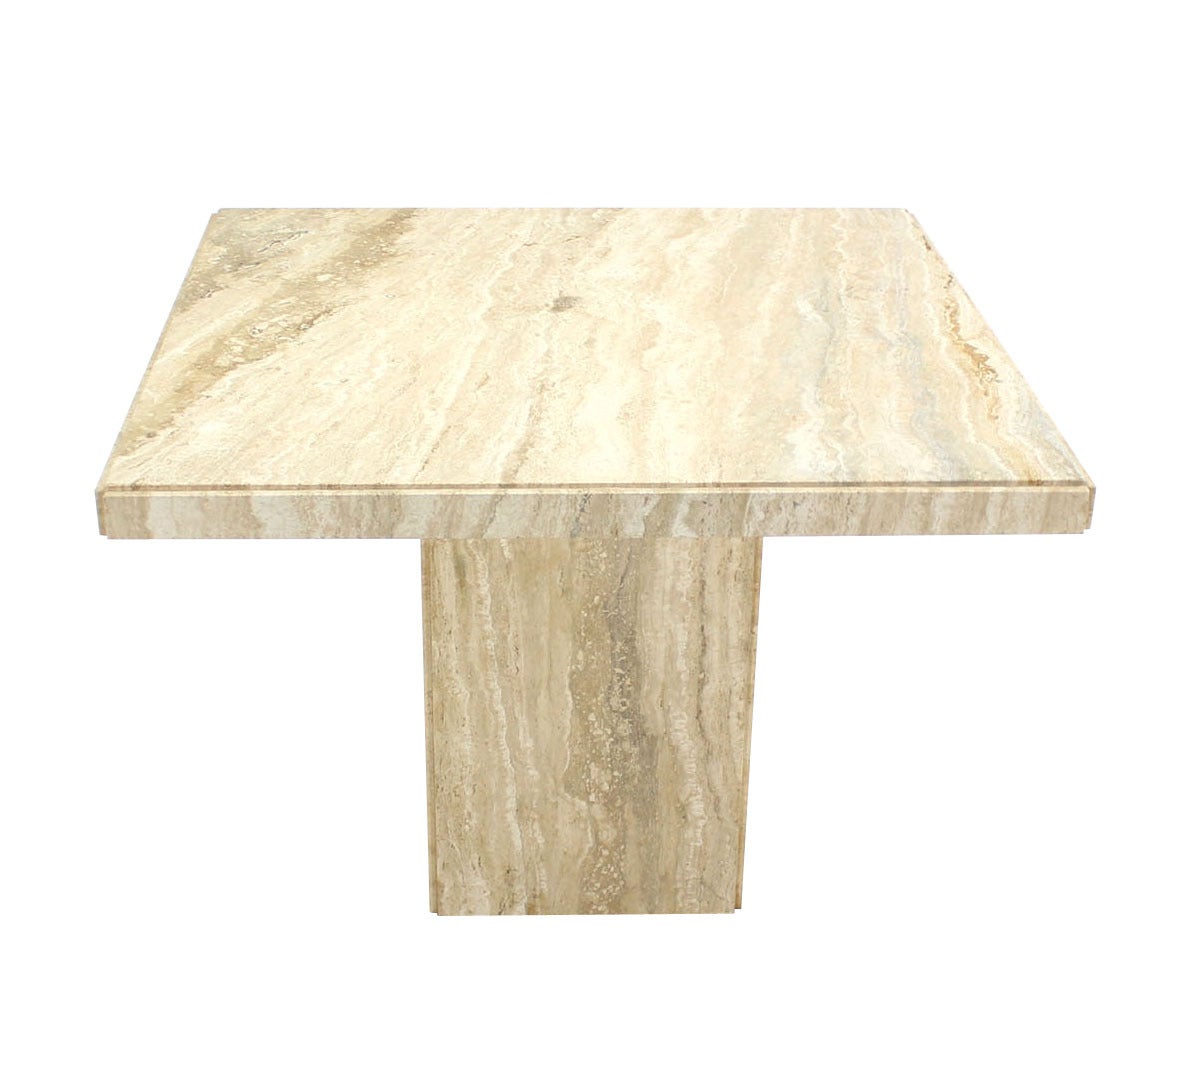 Very nice square marble top on pedestal mid century modern game or small dining room table.